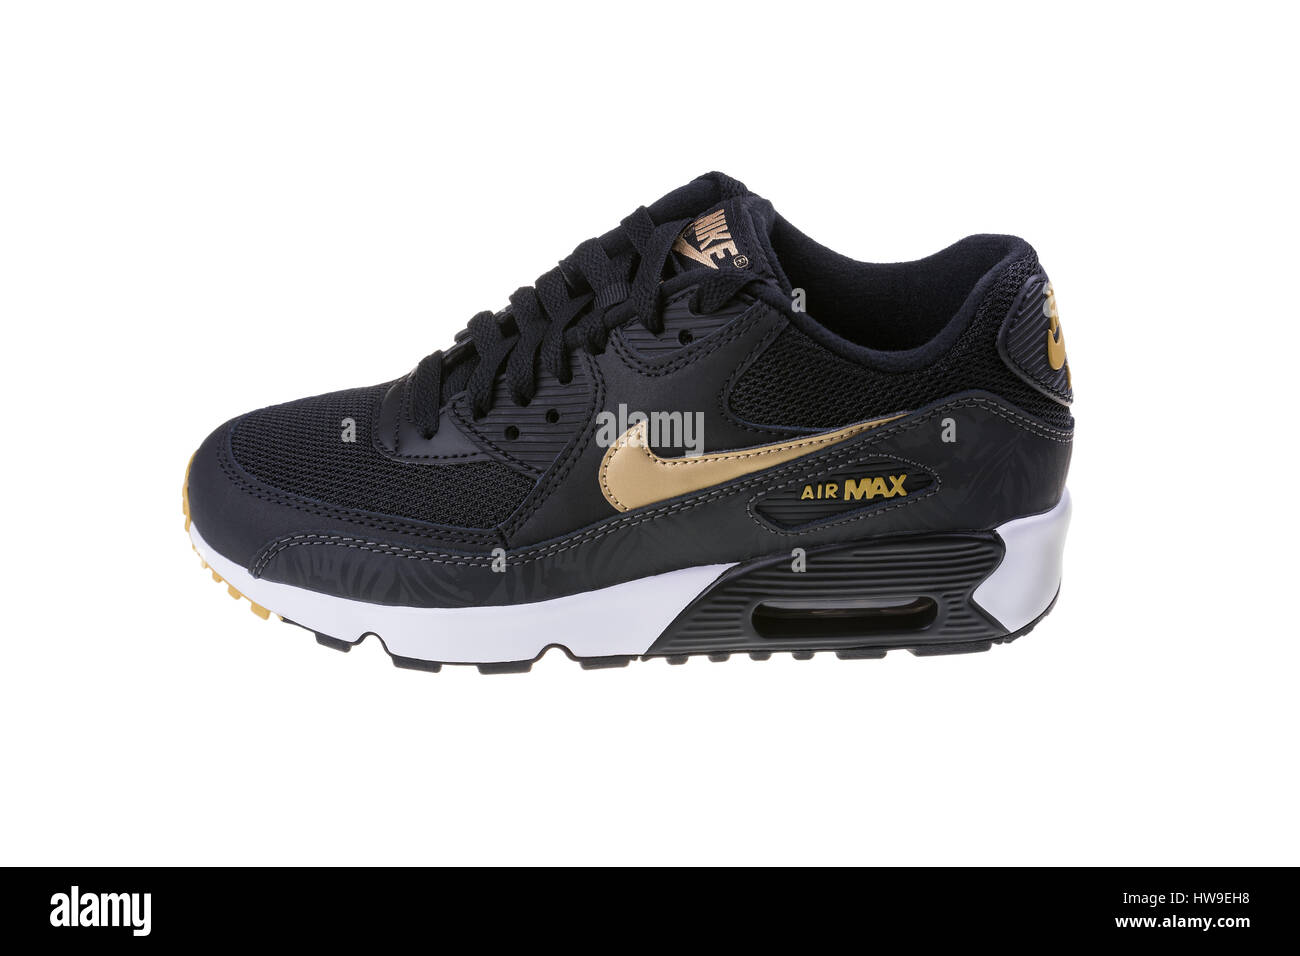 BURGAS, BULGARIA - 29, 2016: Nike Air MAX women's shoes - sneakers in black, isolated on white background. Nike is a global sports an Stock Photo - Alamy